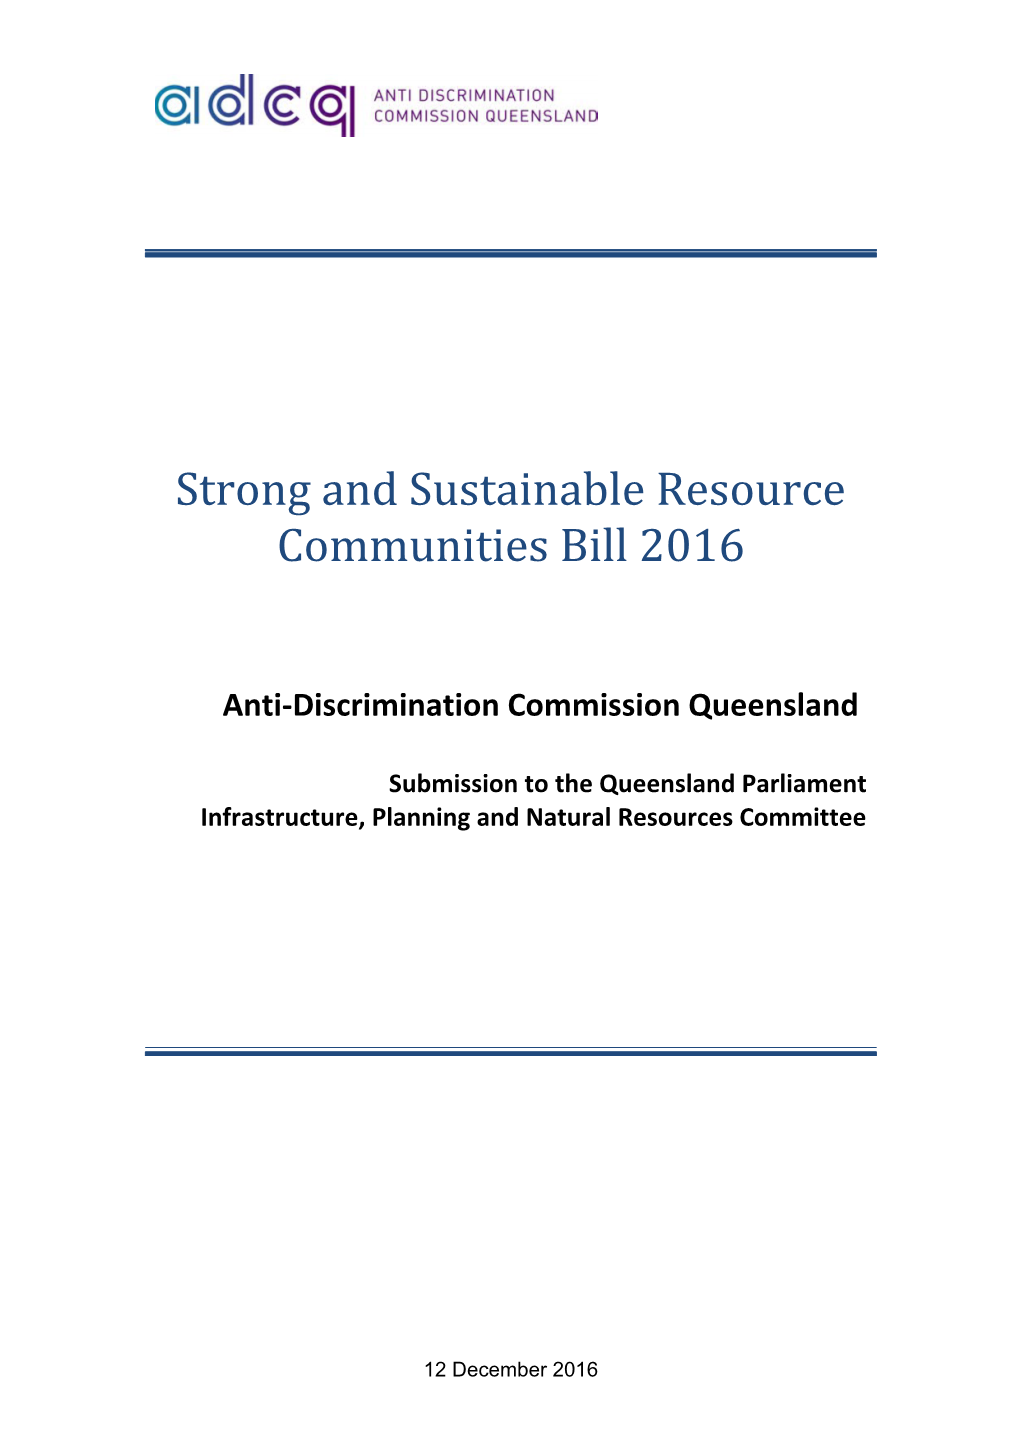 Strong and Sustainable Resource Communities Bill 2016